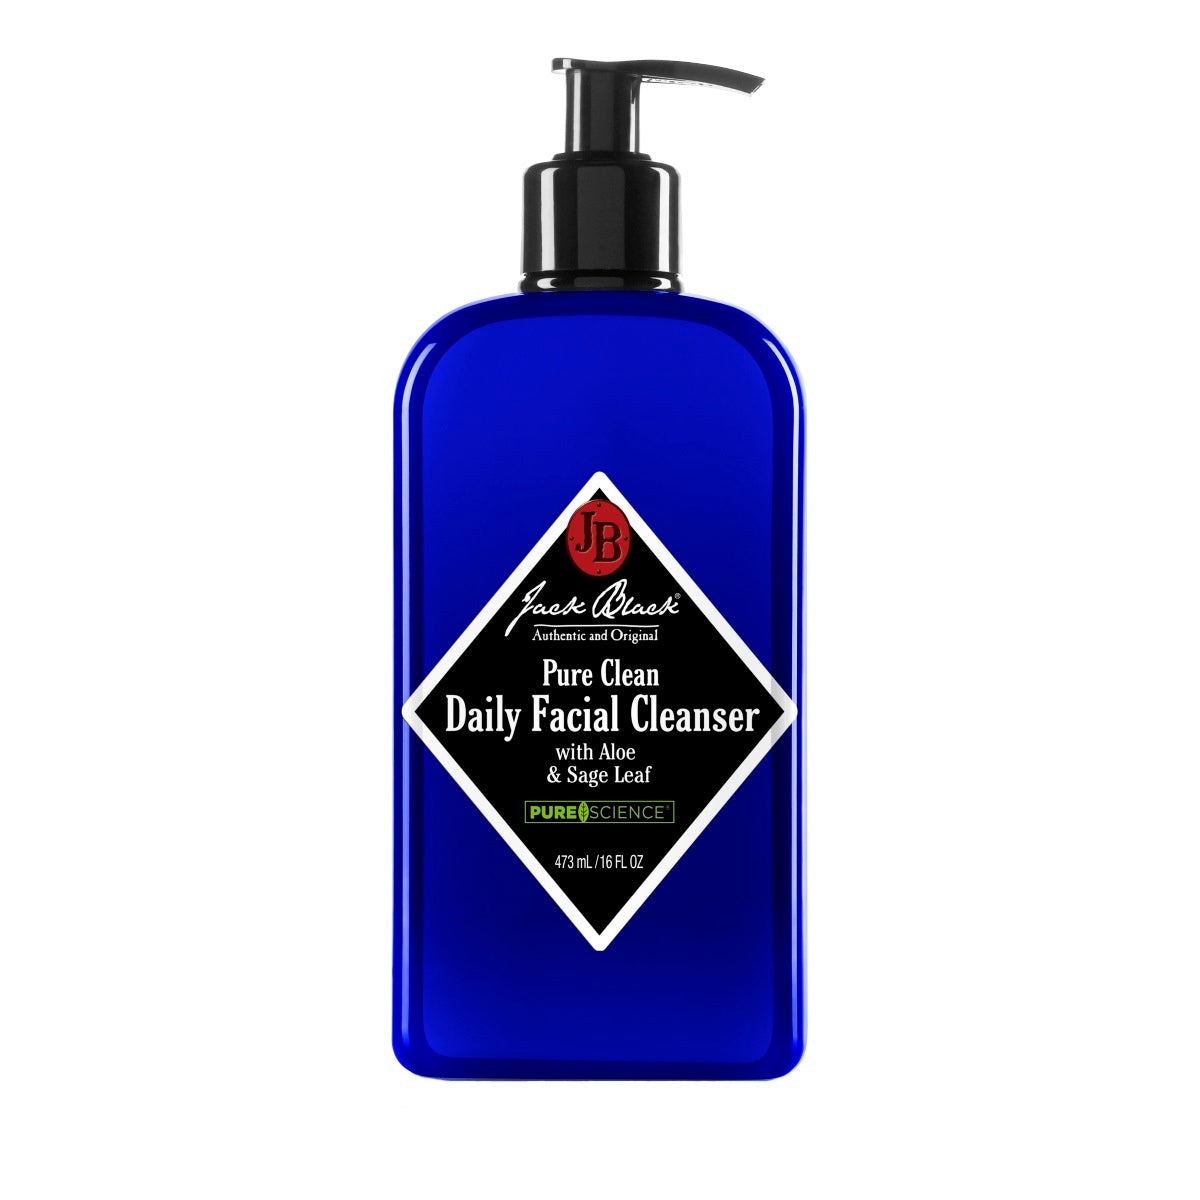 Primary image of Pure Clean Daily Facial Cleanser with Pump